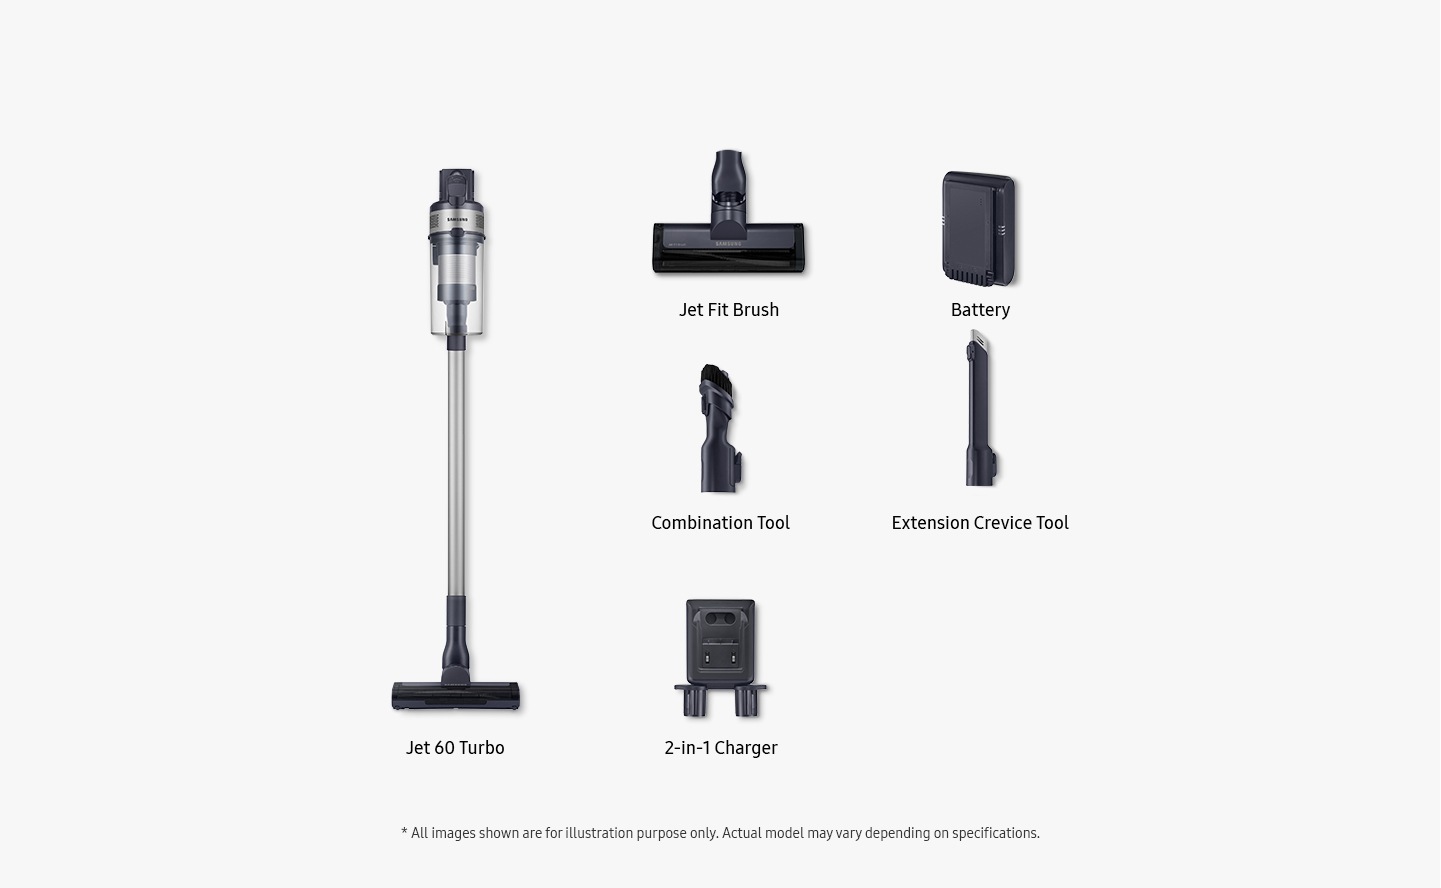 Items included inbox shown: Jet 60 Turbo, jet fit brush, battery, combination tool, extension crevice tool and 2-in-1 charger. All images shown are for illustration purpose only. Actual model may vary depending on specifications.